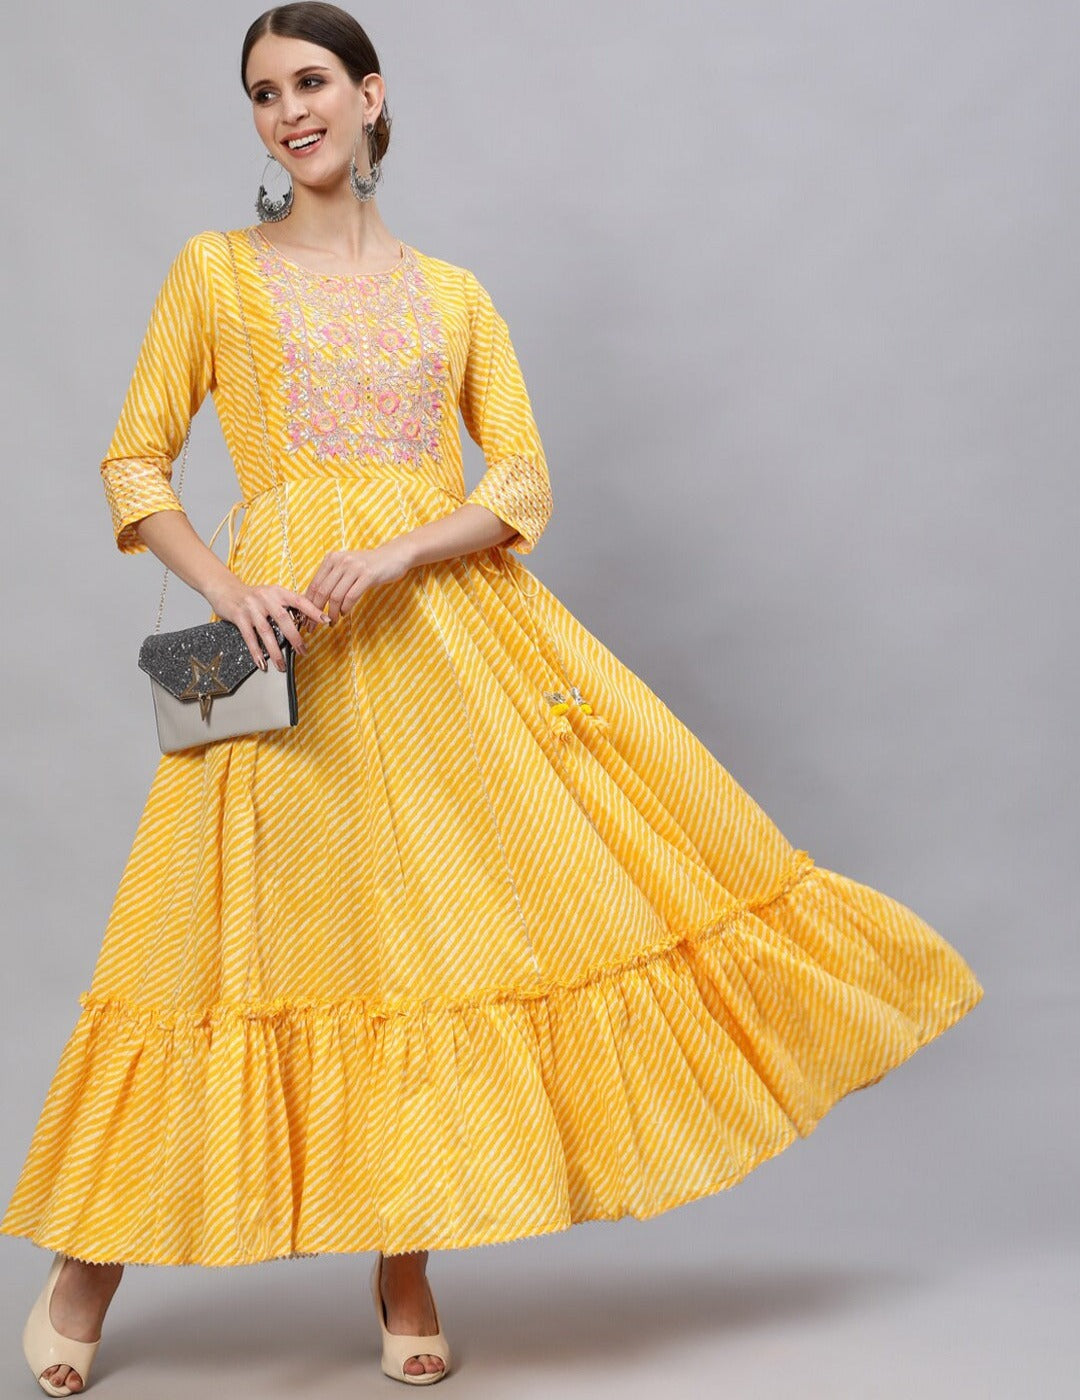 Online Indian Clothing Store"